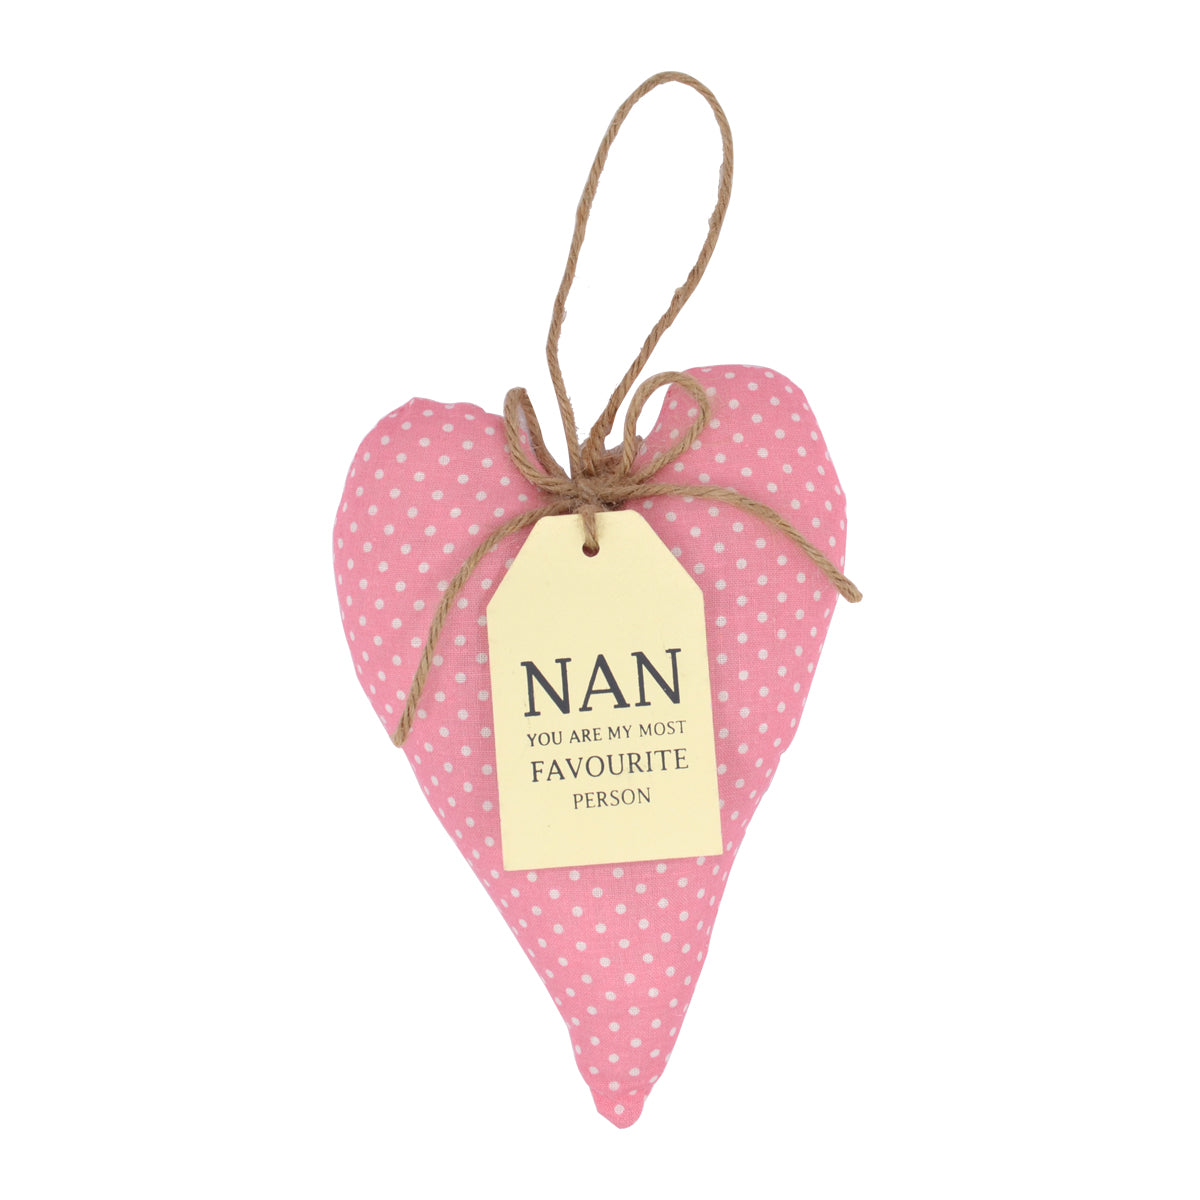 Special Nan Sentiments From The Heart Hanging Cushion